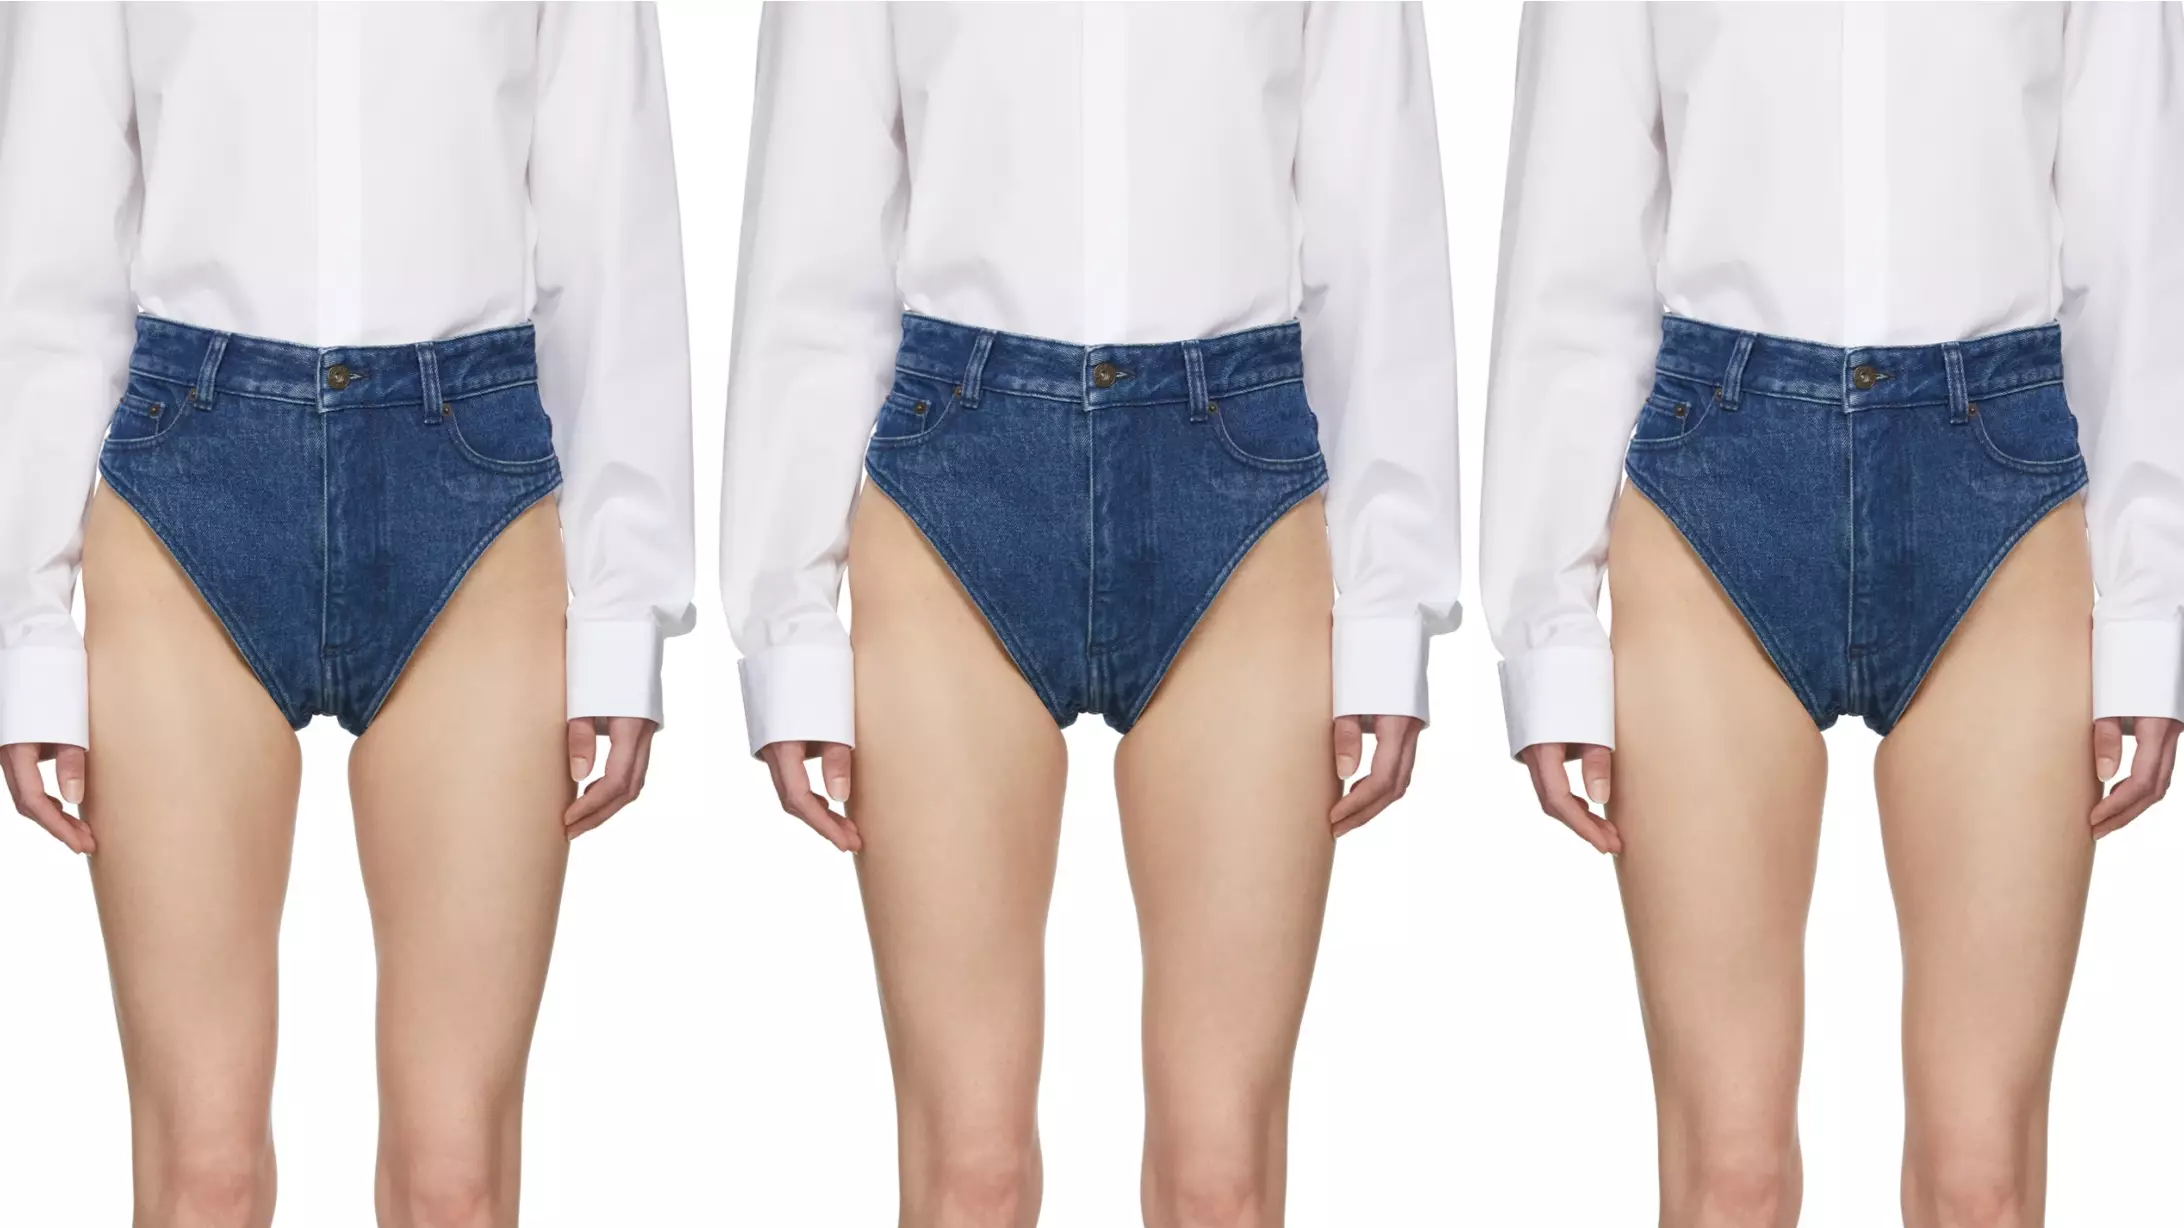 This Brand Is Selling Denim Panties For A Whopping £235